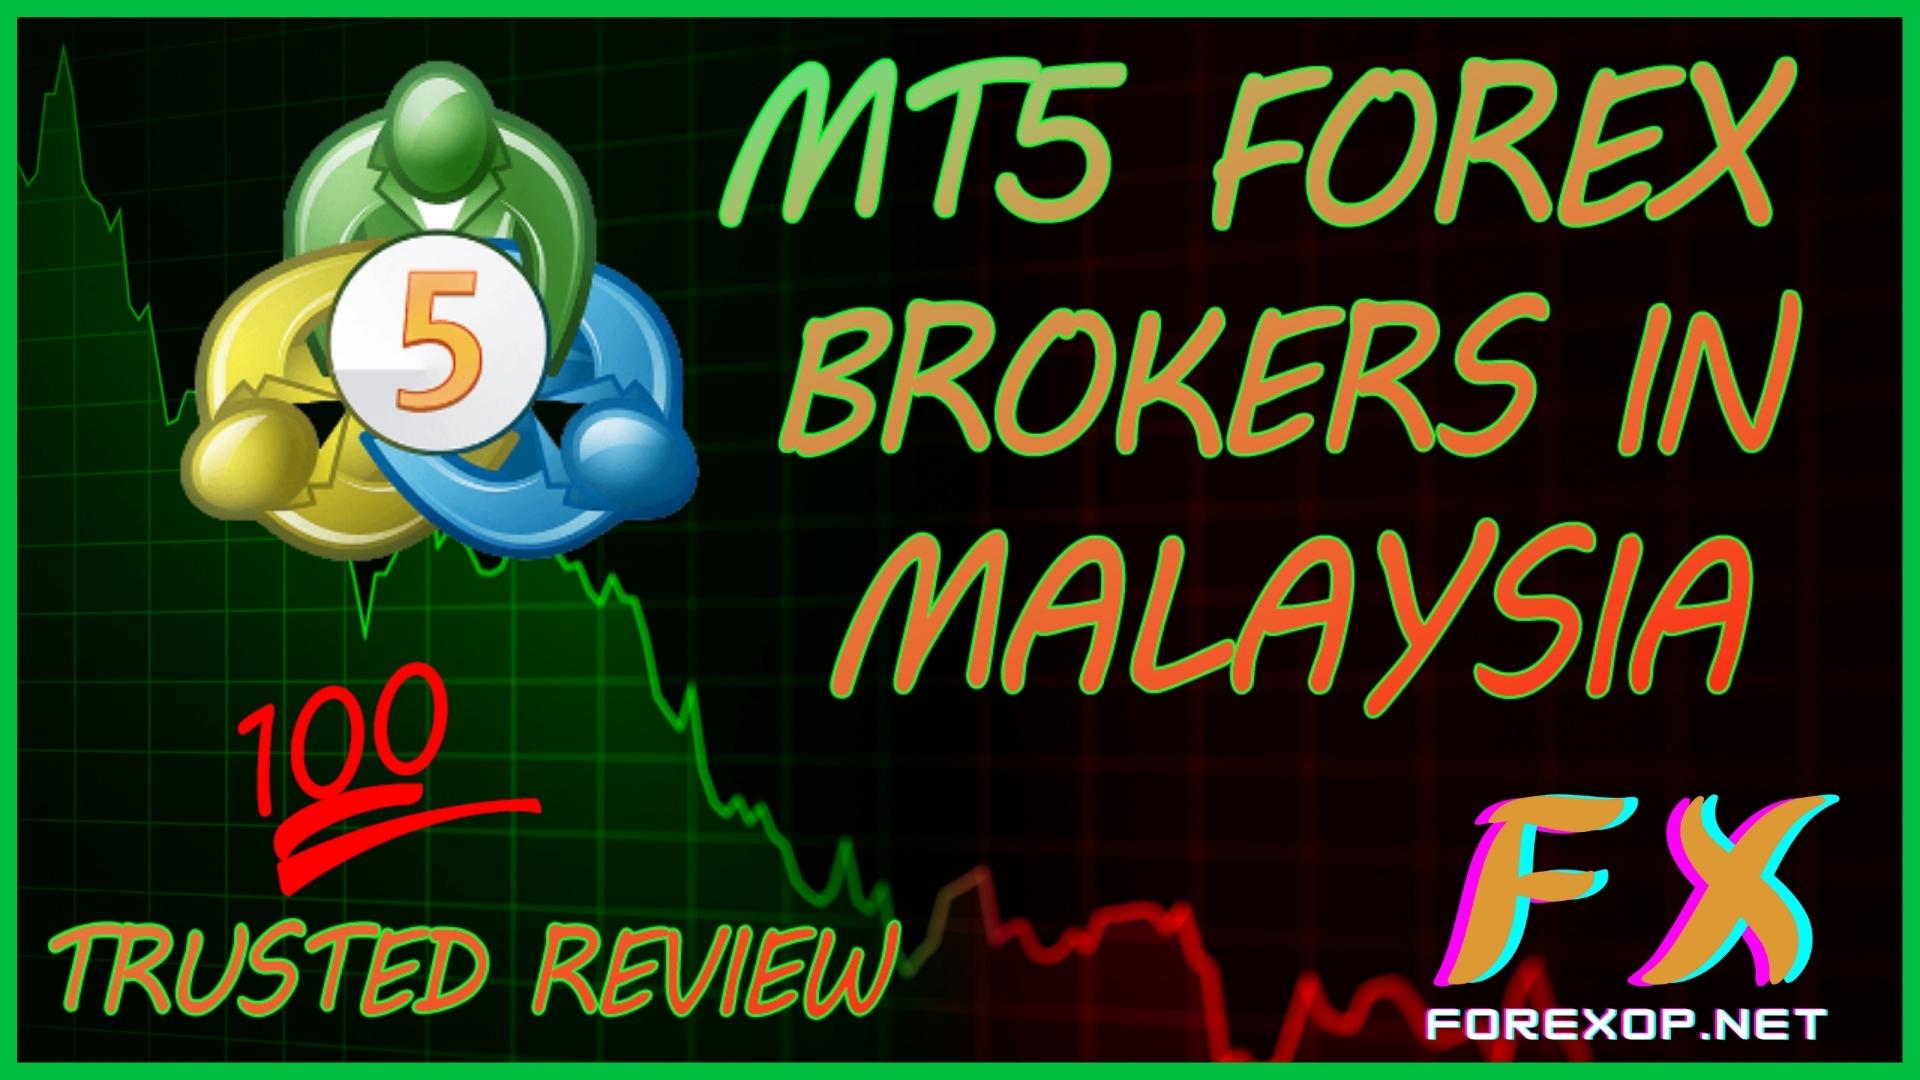 Top forex brokers in malaysia forex chat ofz